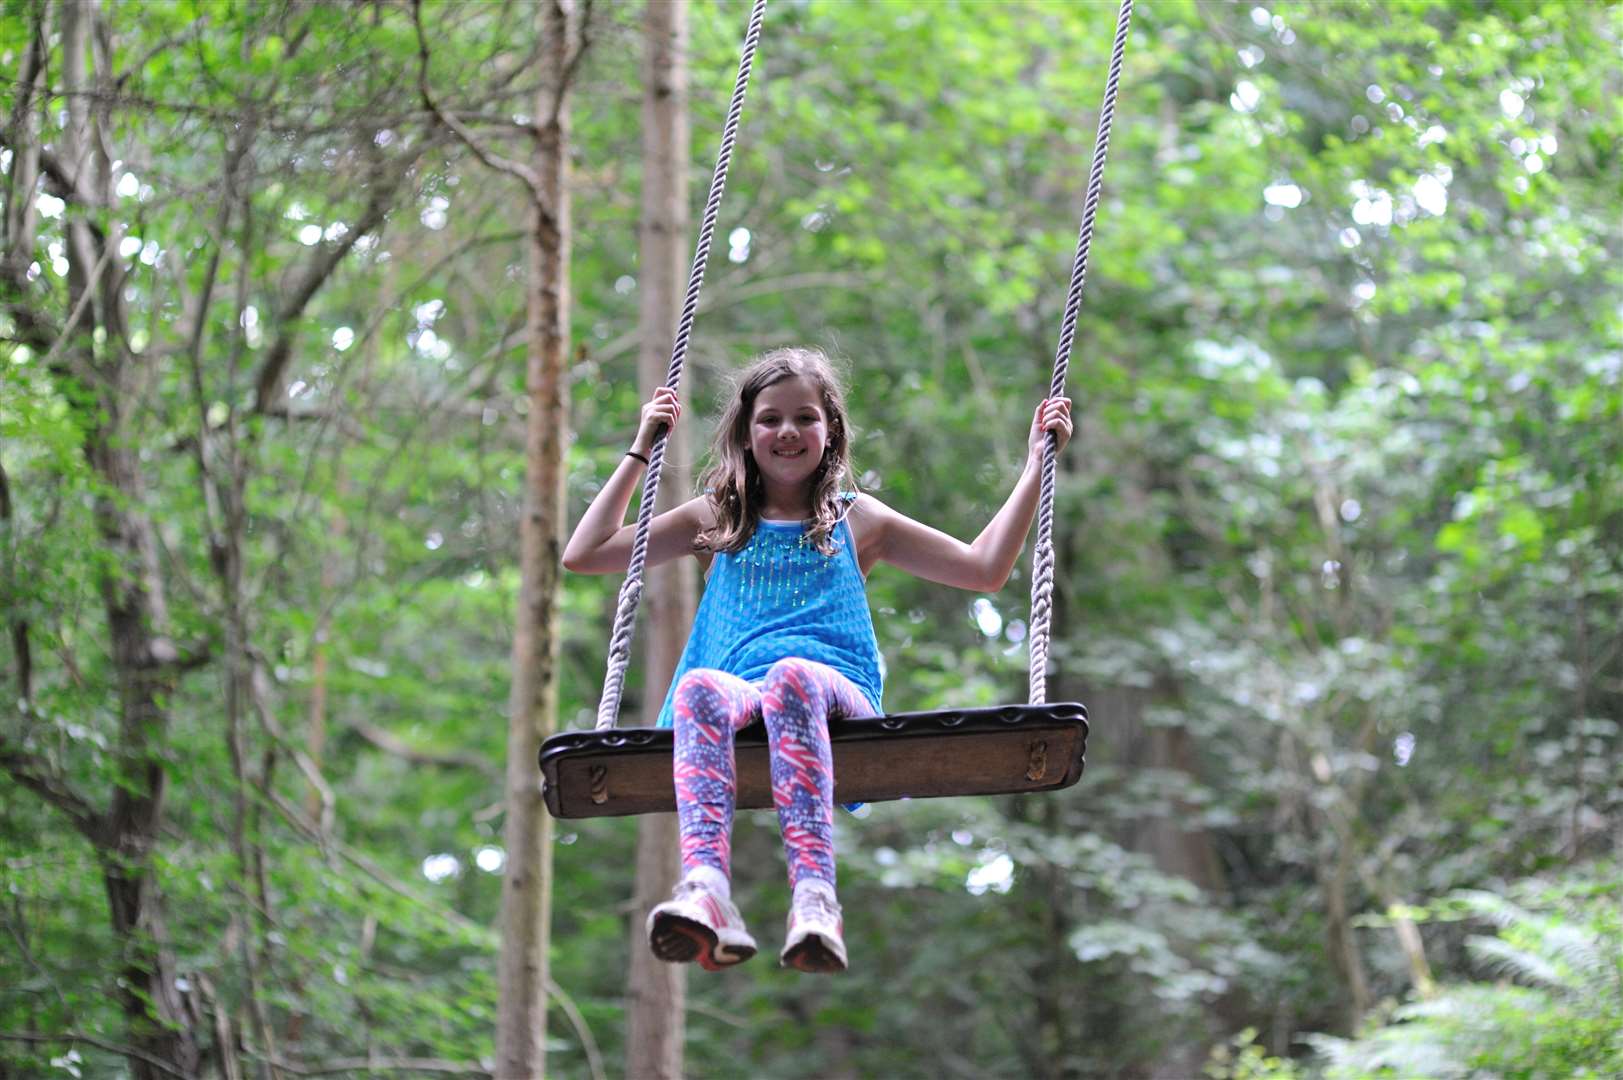 The giant swings at Groombridge Place